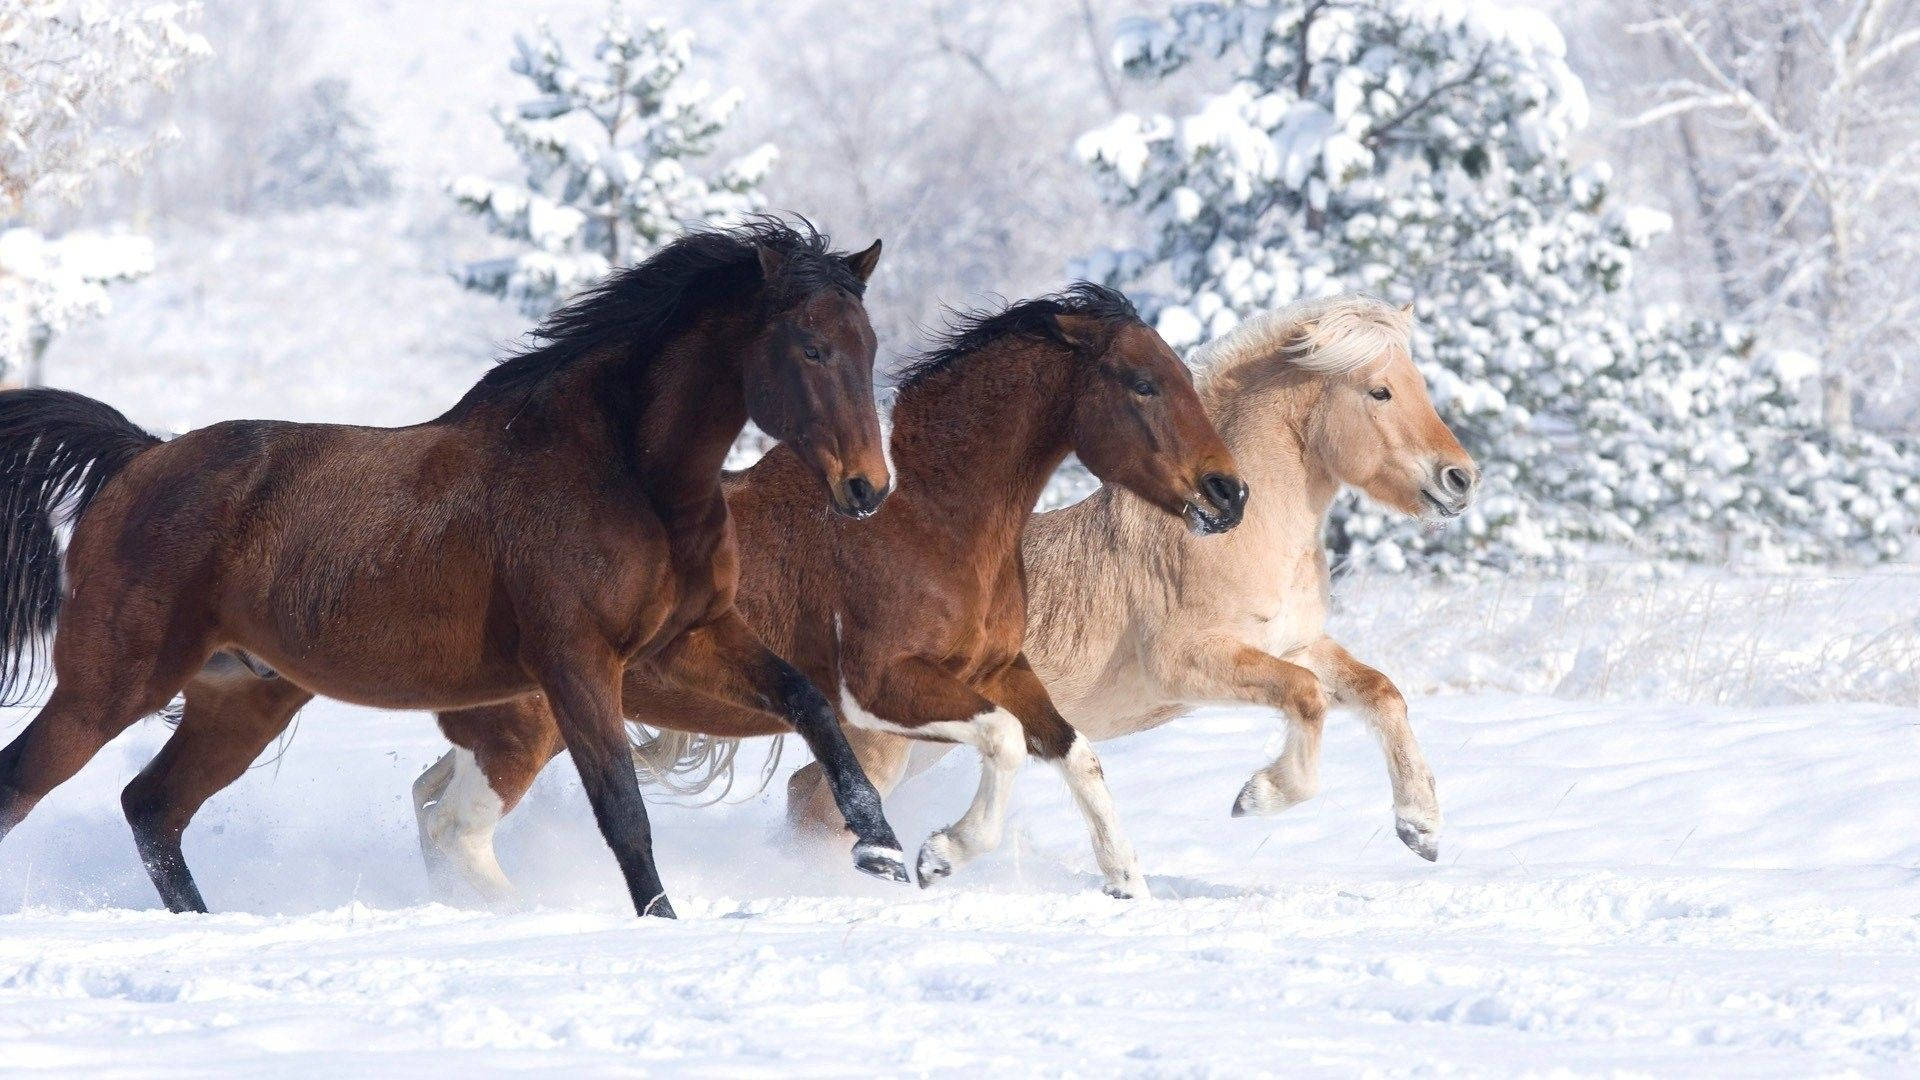 Cute Horses In Snowy Forest Wallpaper